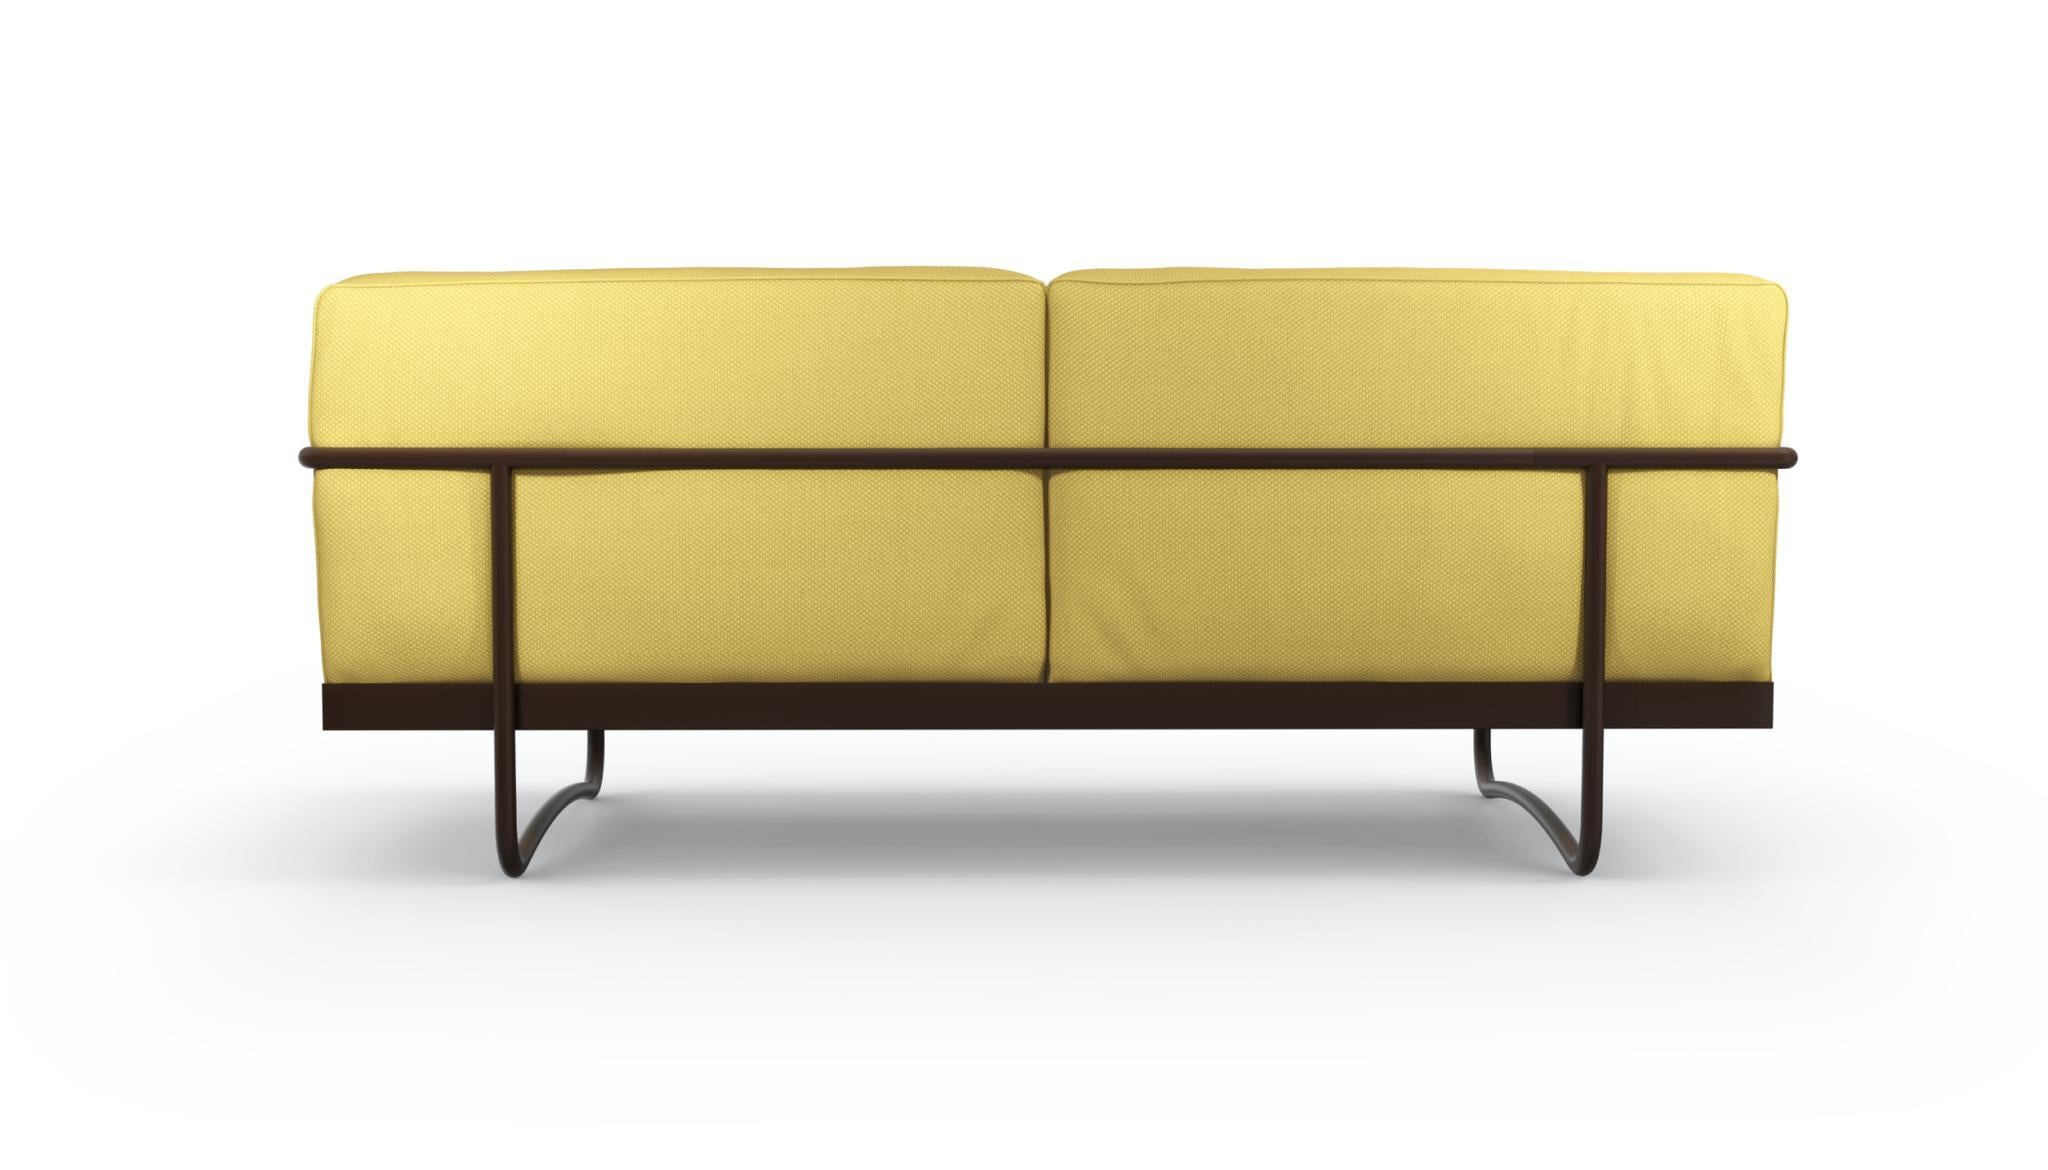 Metal Le Corbusier, Pierre Jeanneret, Charlotte Perriand LC5 Sofa by Cassina For Sale